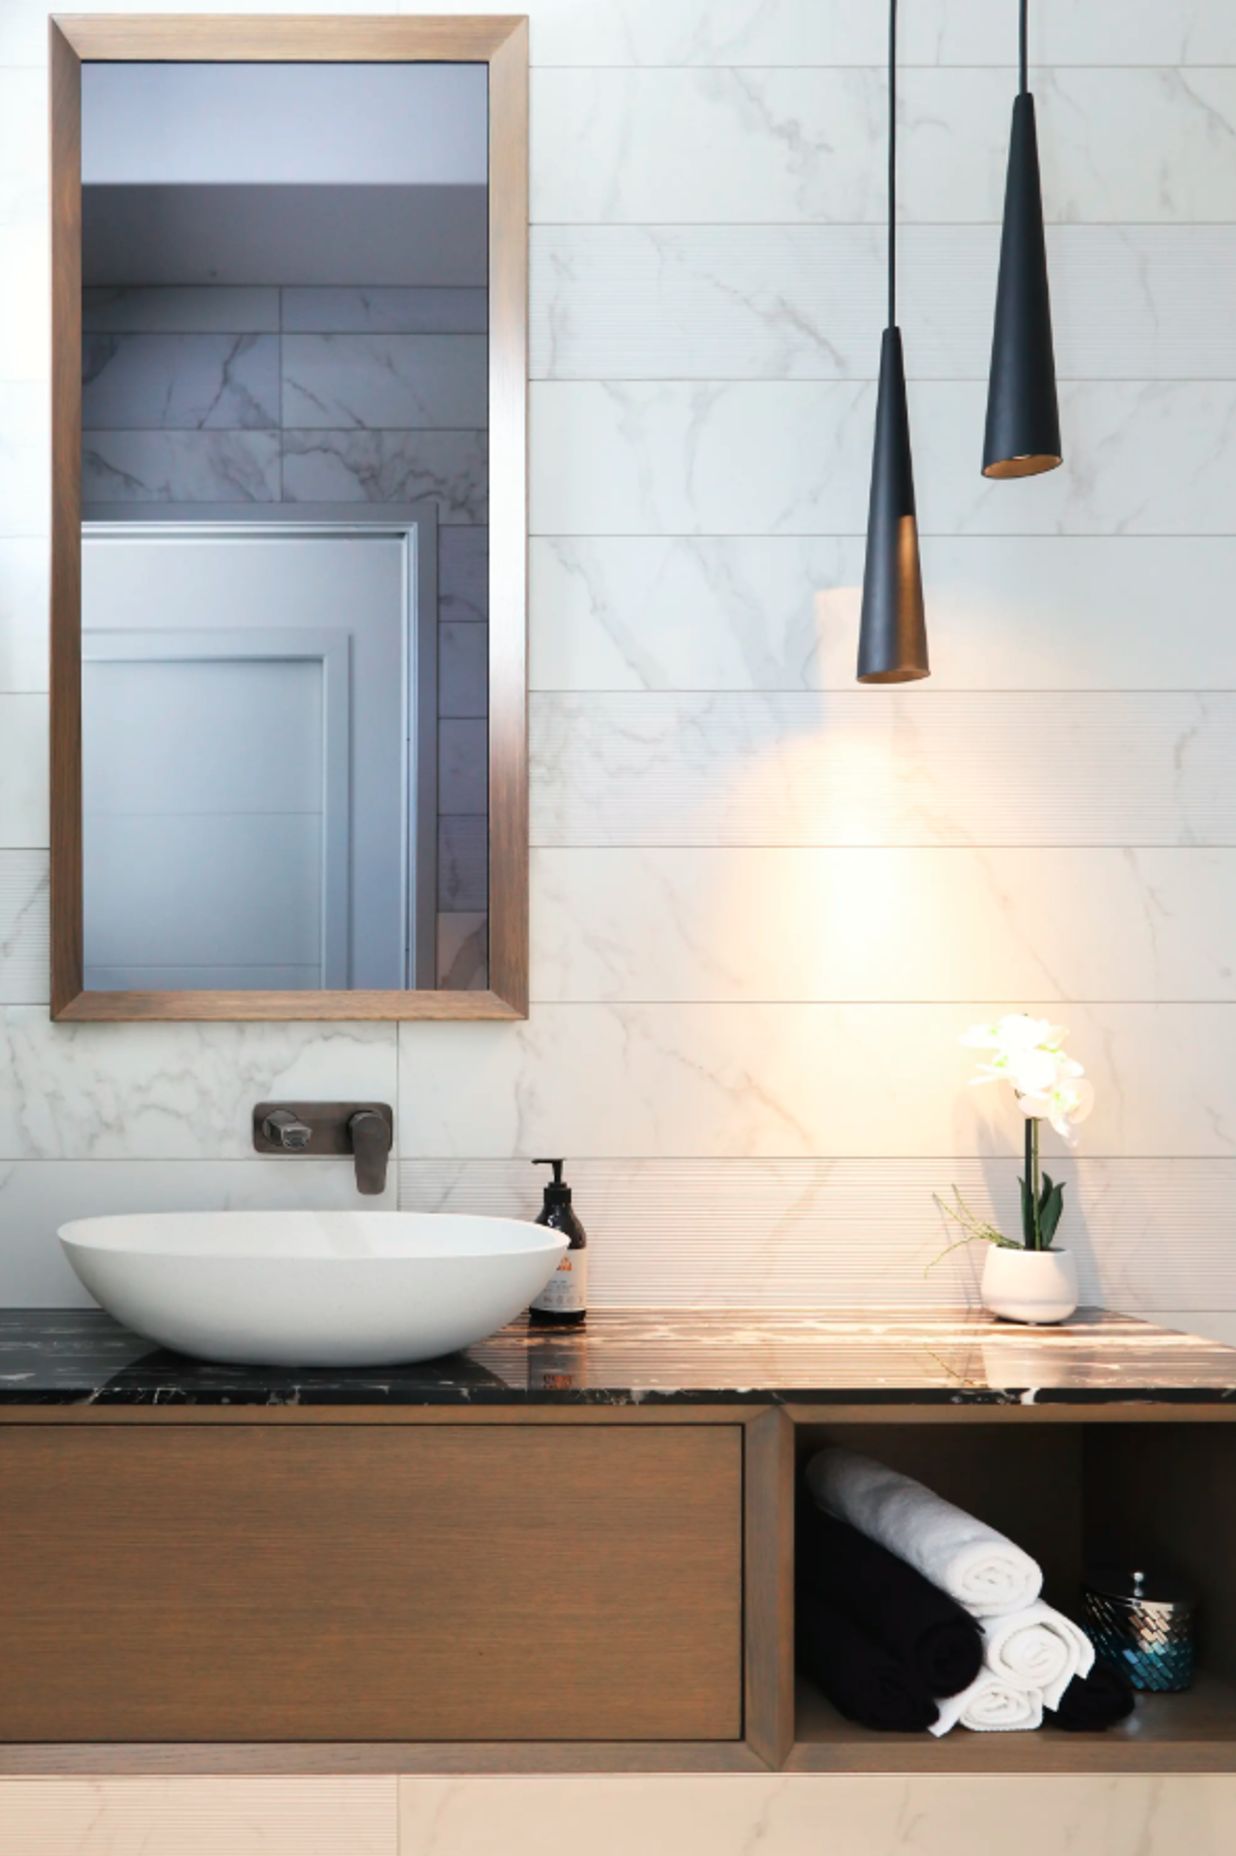 How to choose the right lighting for your bathroom vanity
